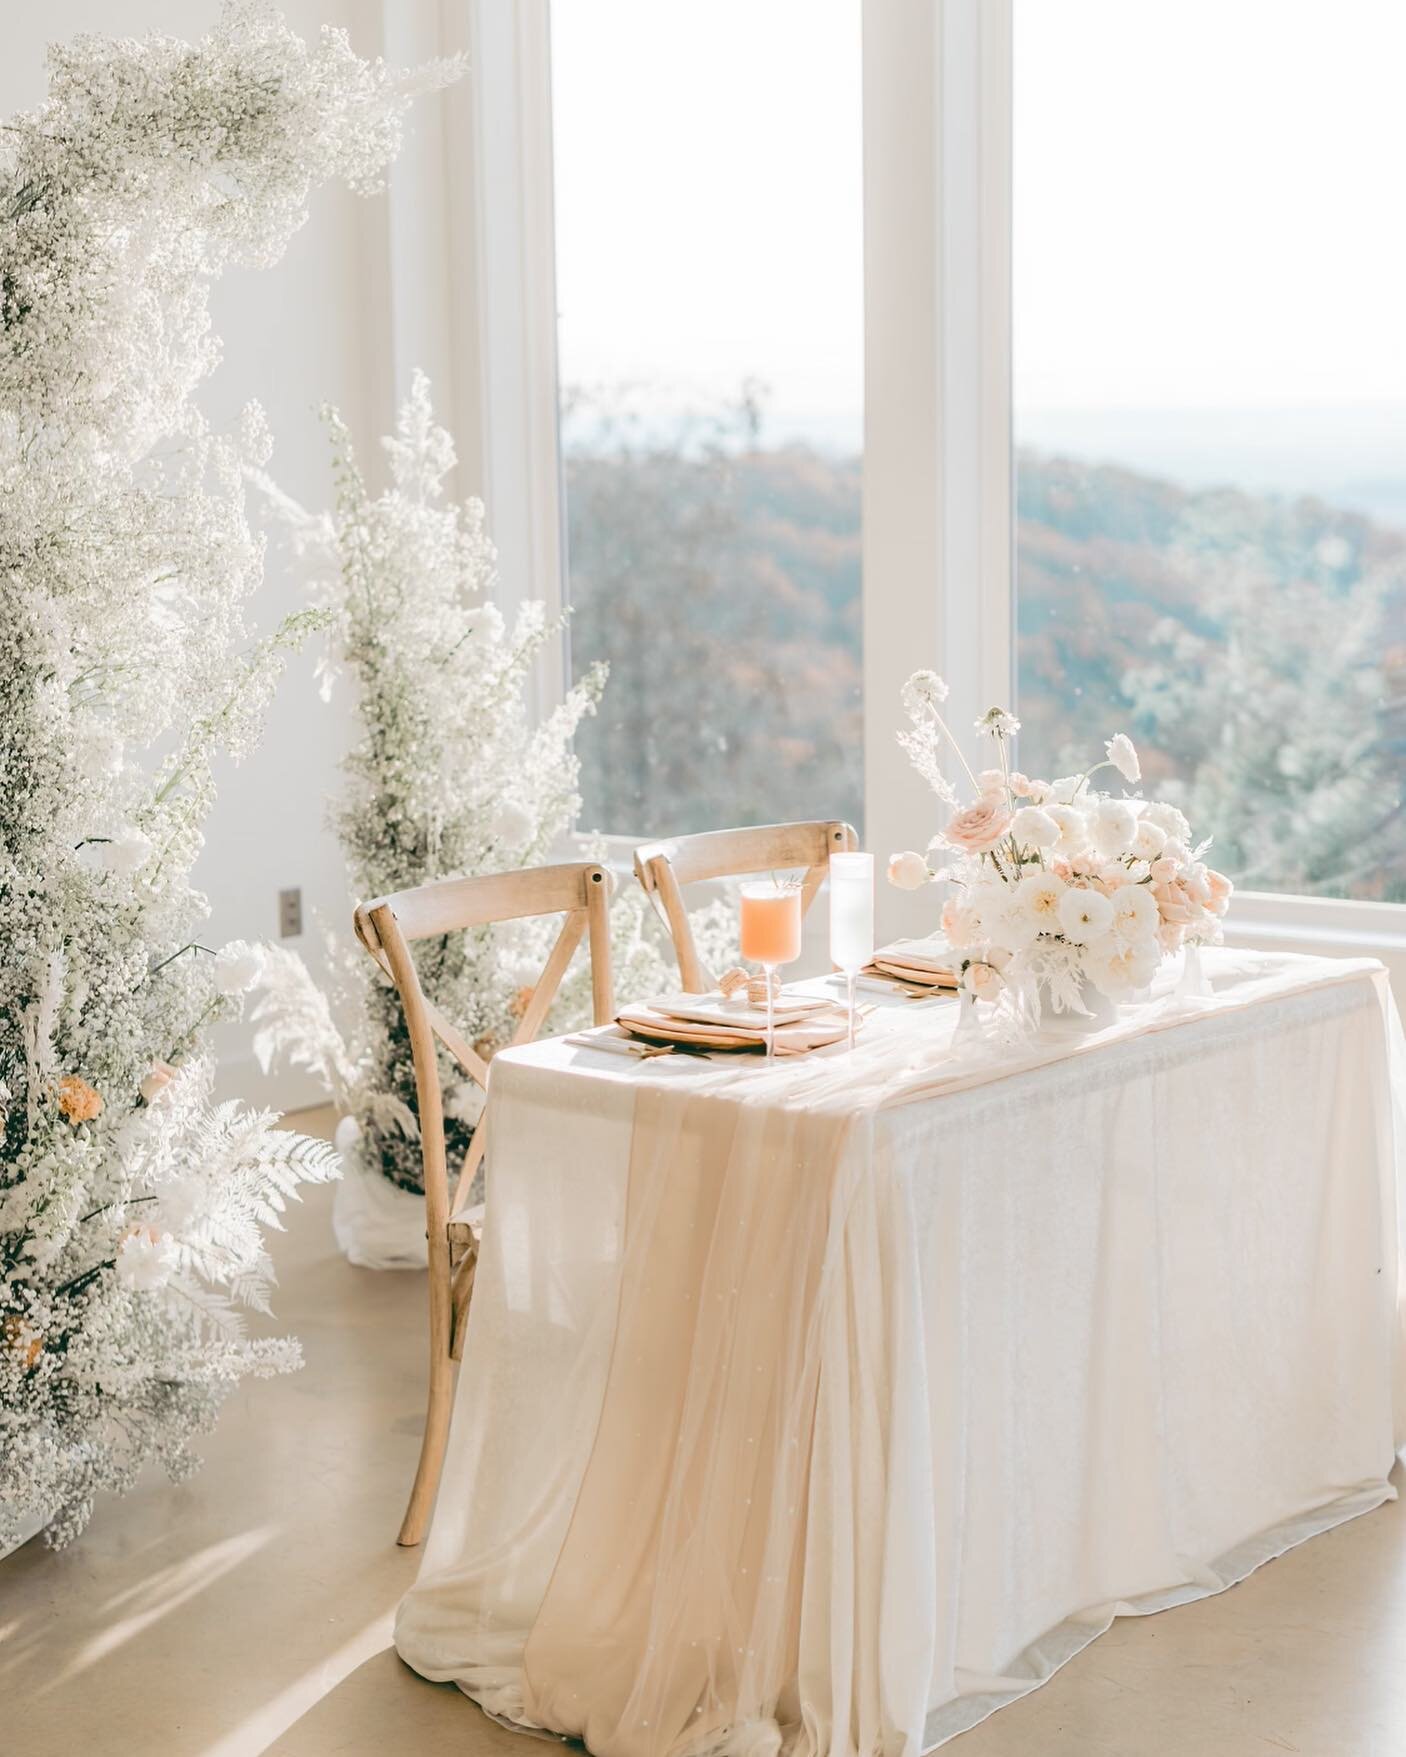 One question I always ask my sweet couples before designing their layout for the reception is... If they want a head table or a sweetheart table. 💕 

Head tables are fantastic if you want to be with your bridal party. If you want a more intimate sty